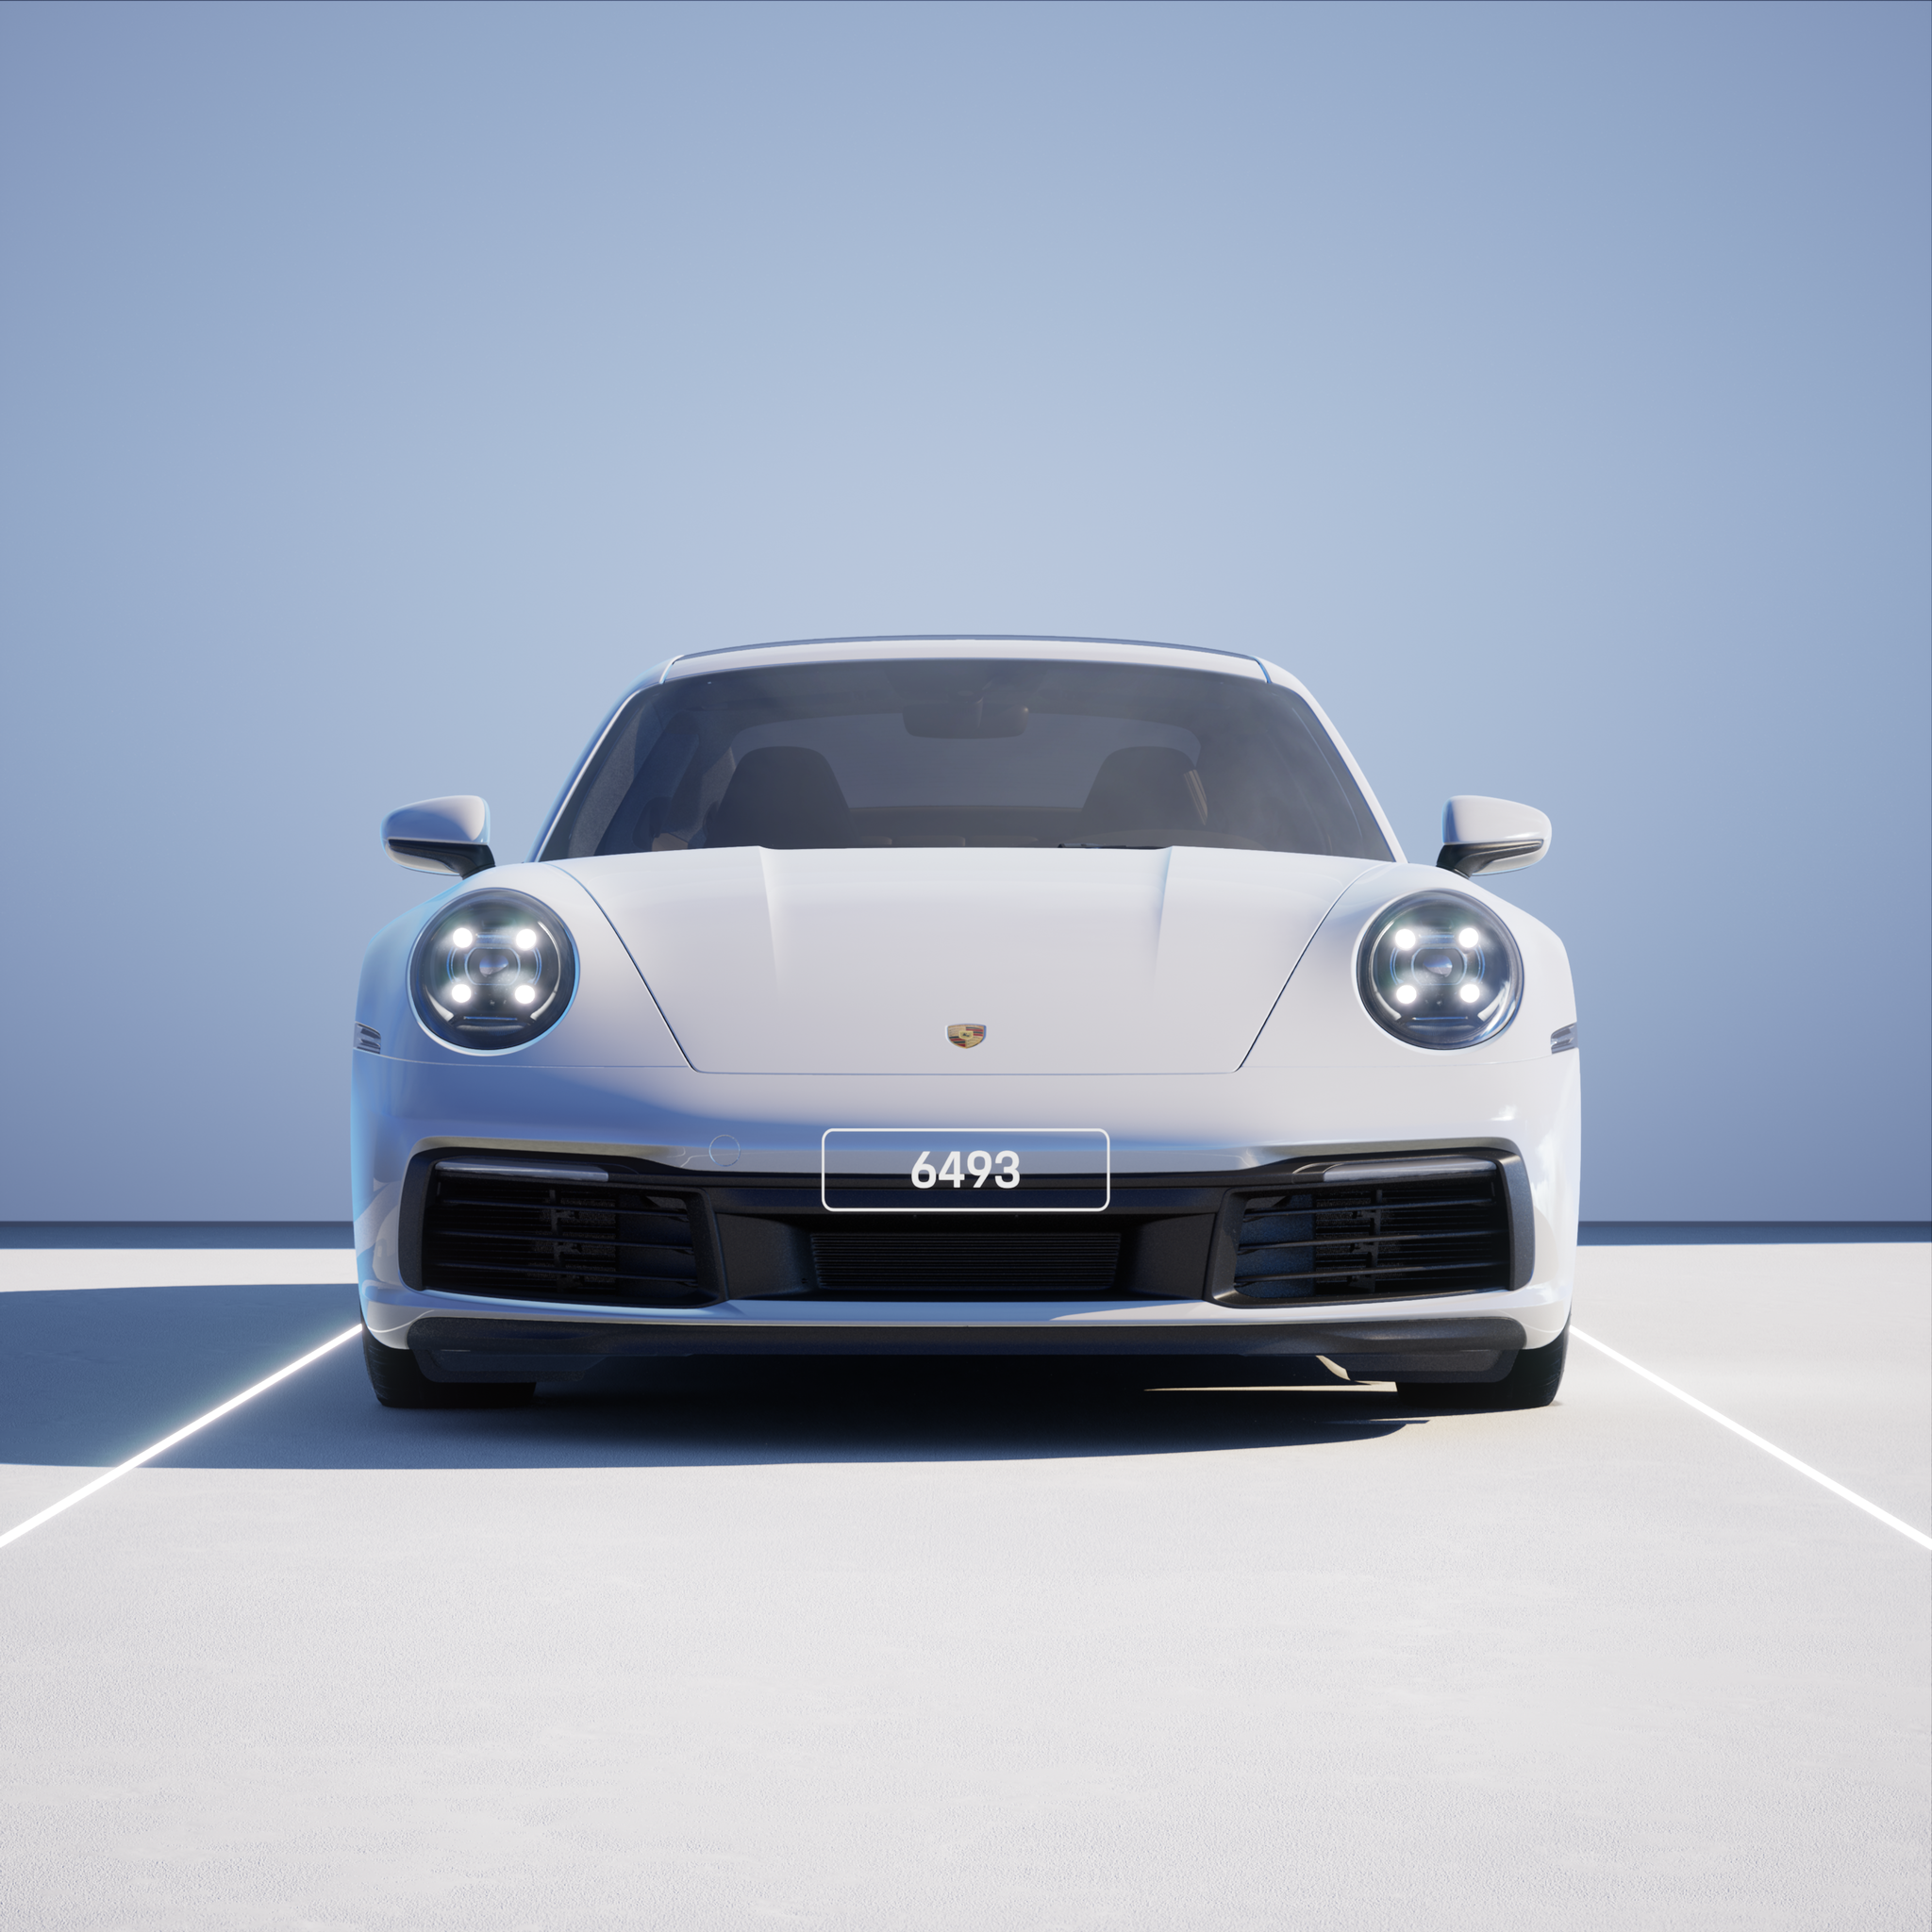 The PORSCHΞ 911 6493 image in phase